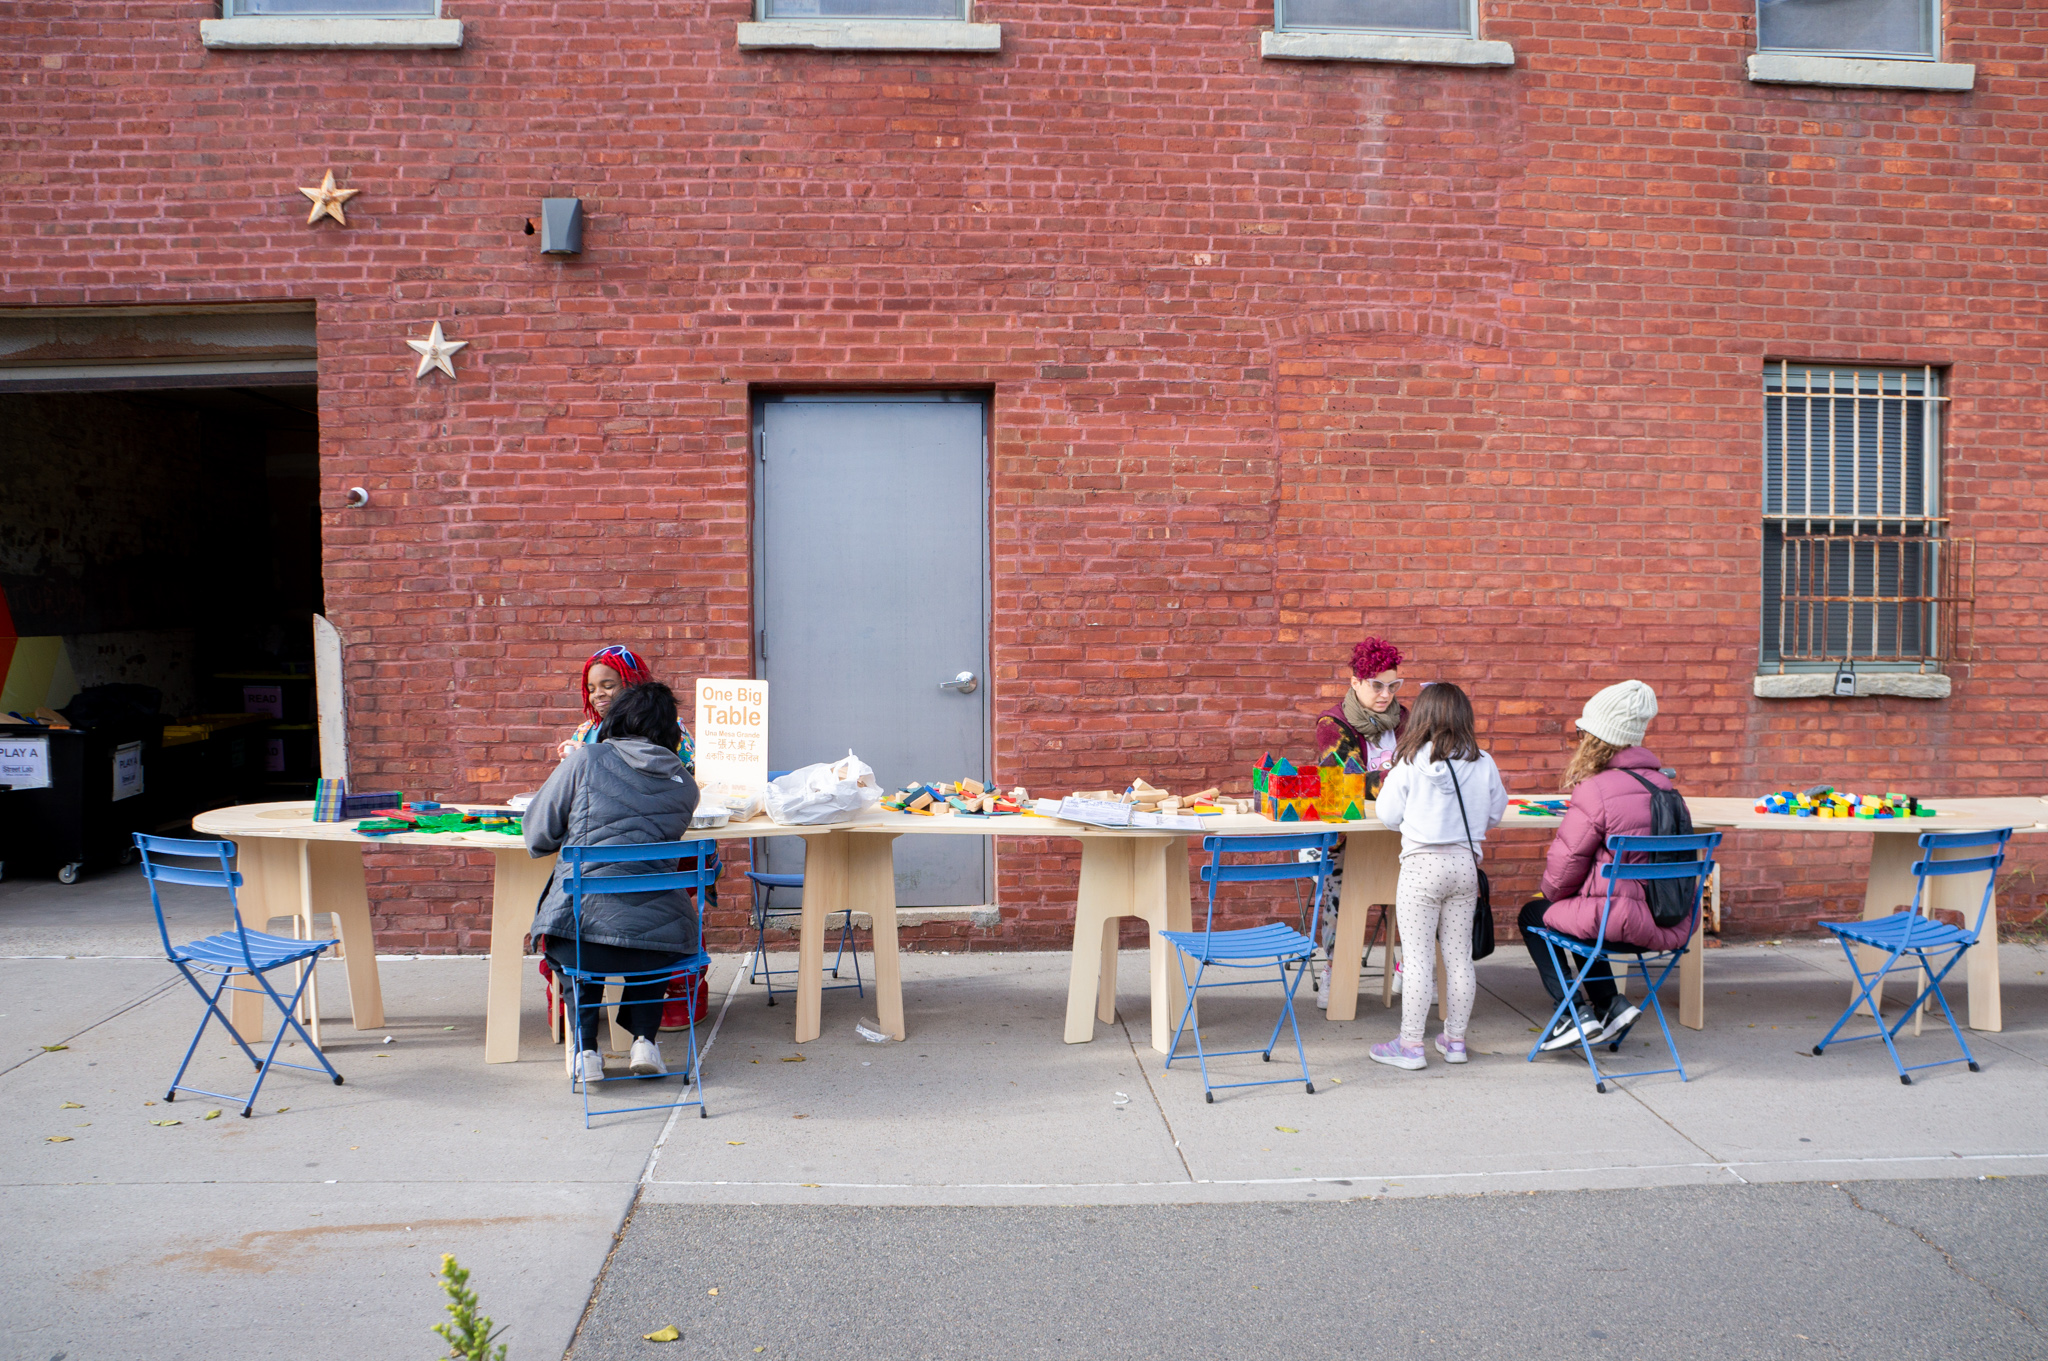 People sitting at a table on a sidewalk.